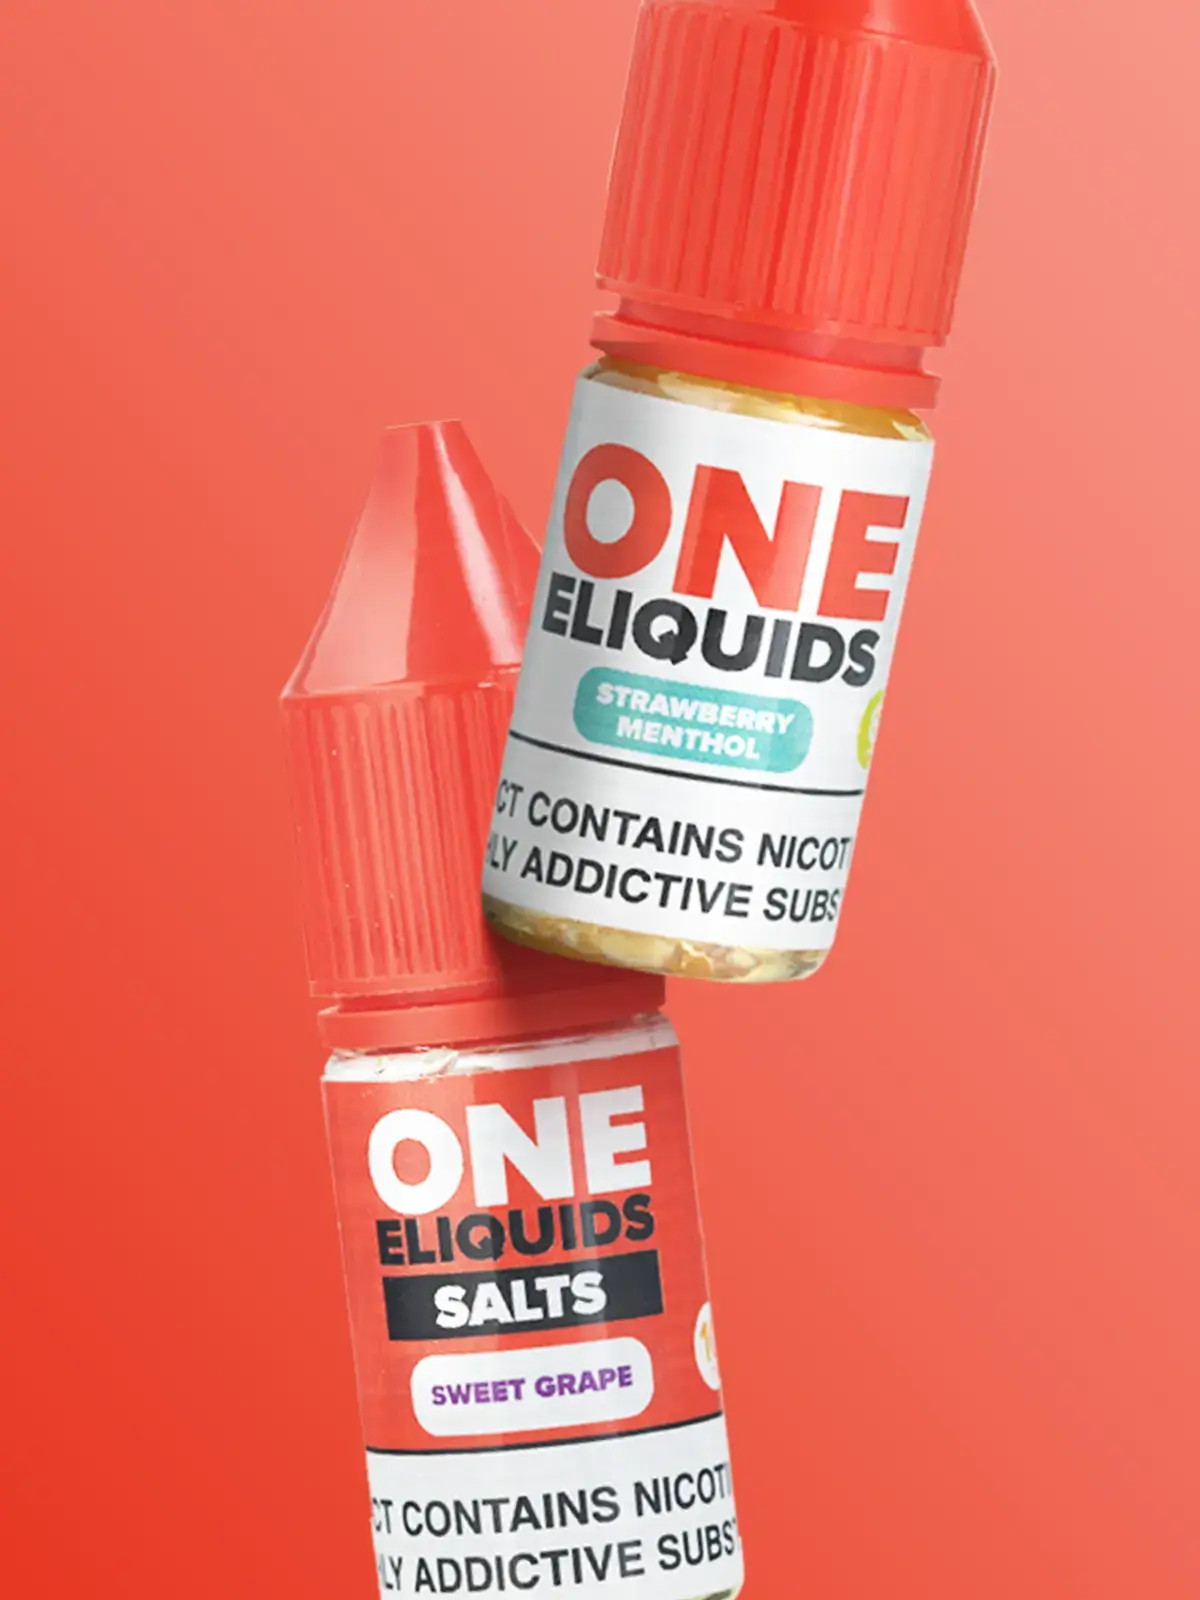 Two bottles of One E-liquids e-liquid; Strawberry Menthol and Sweet Grape flavours. Floating in front of a red background